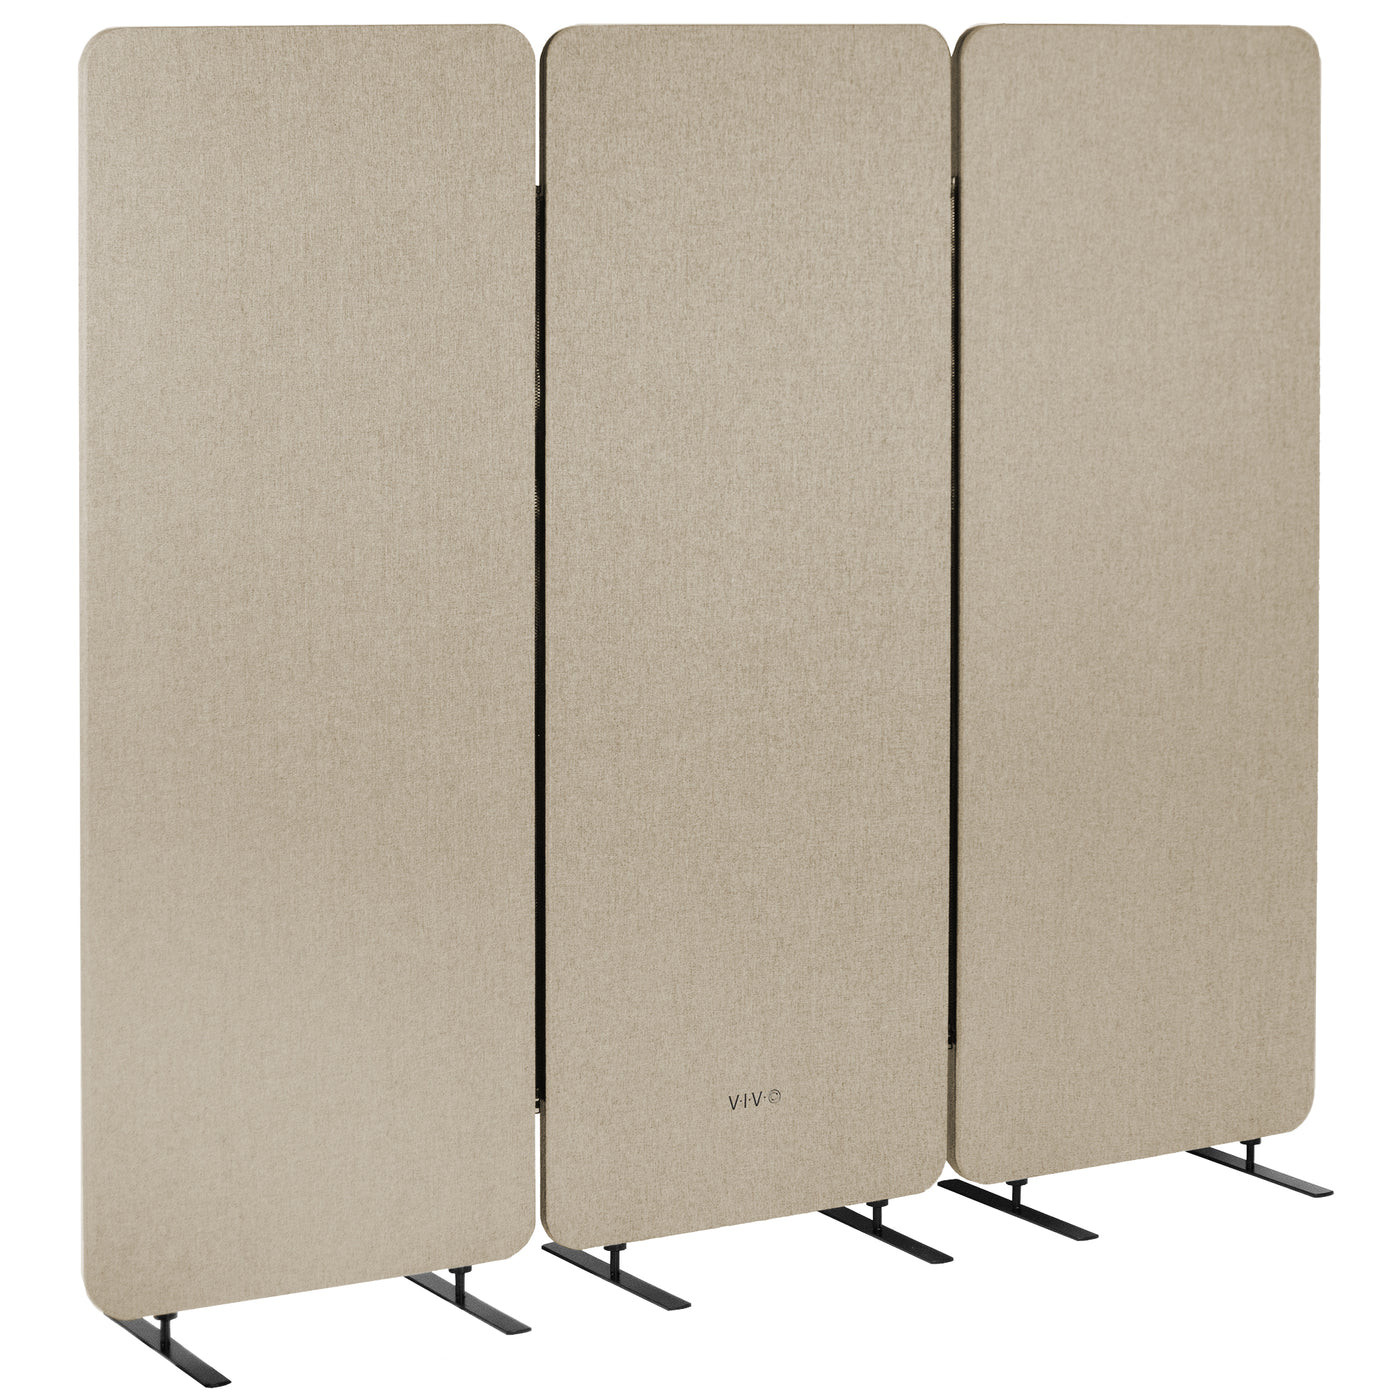 3-Panel Beige Freestanding Room Divider provides a convenient partition and workspace privacy.